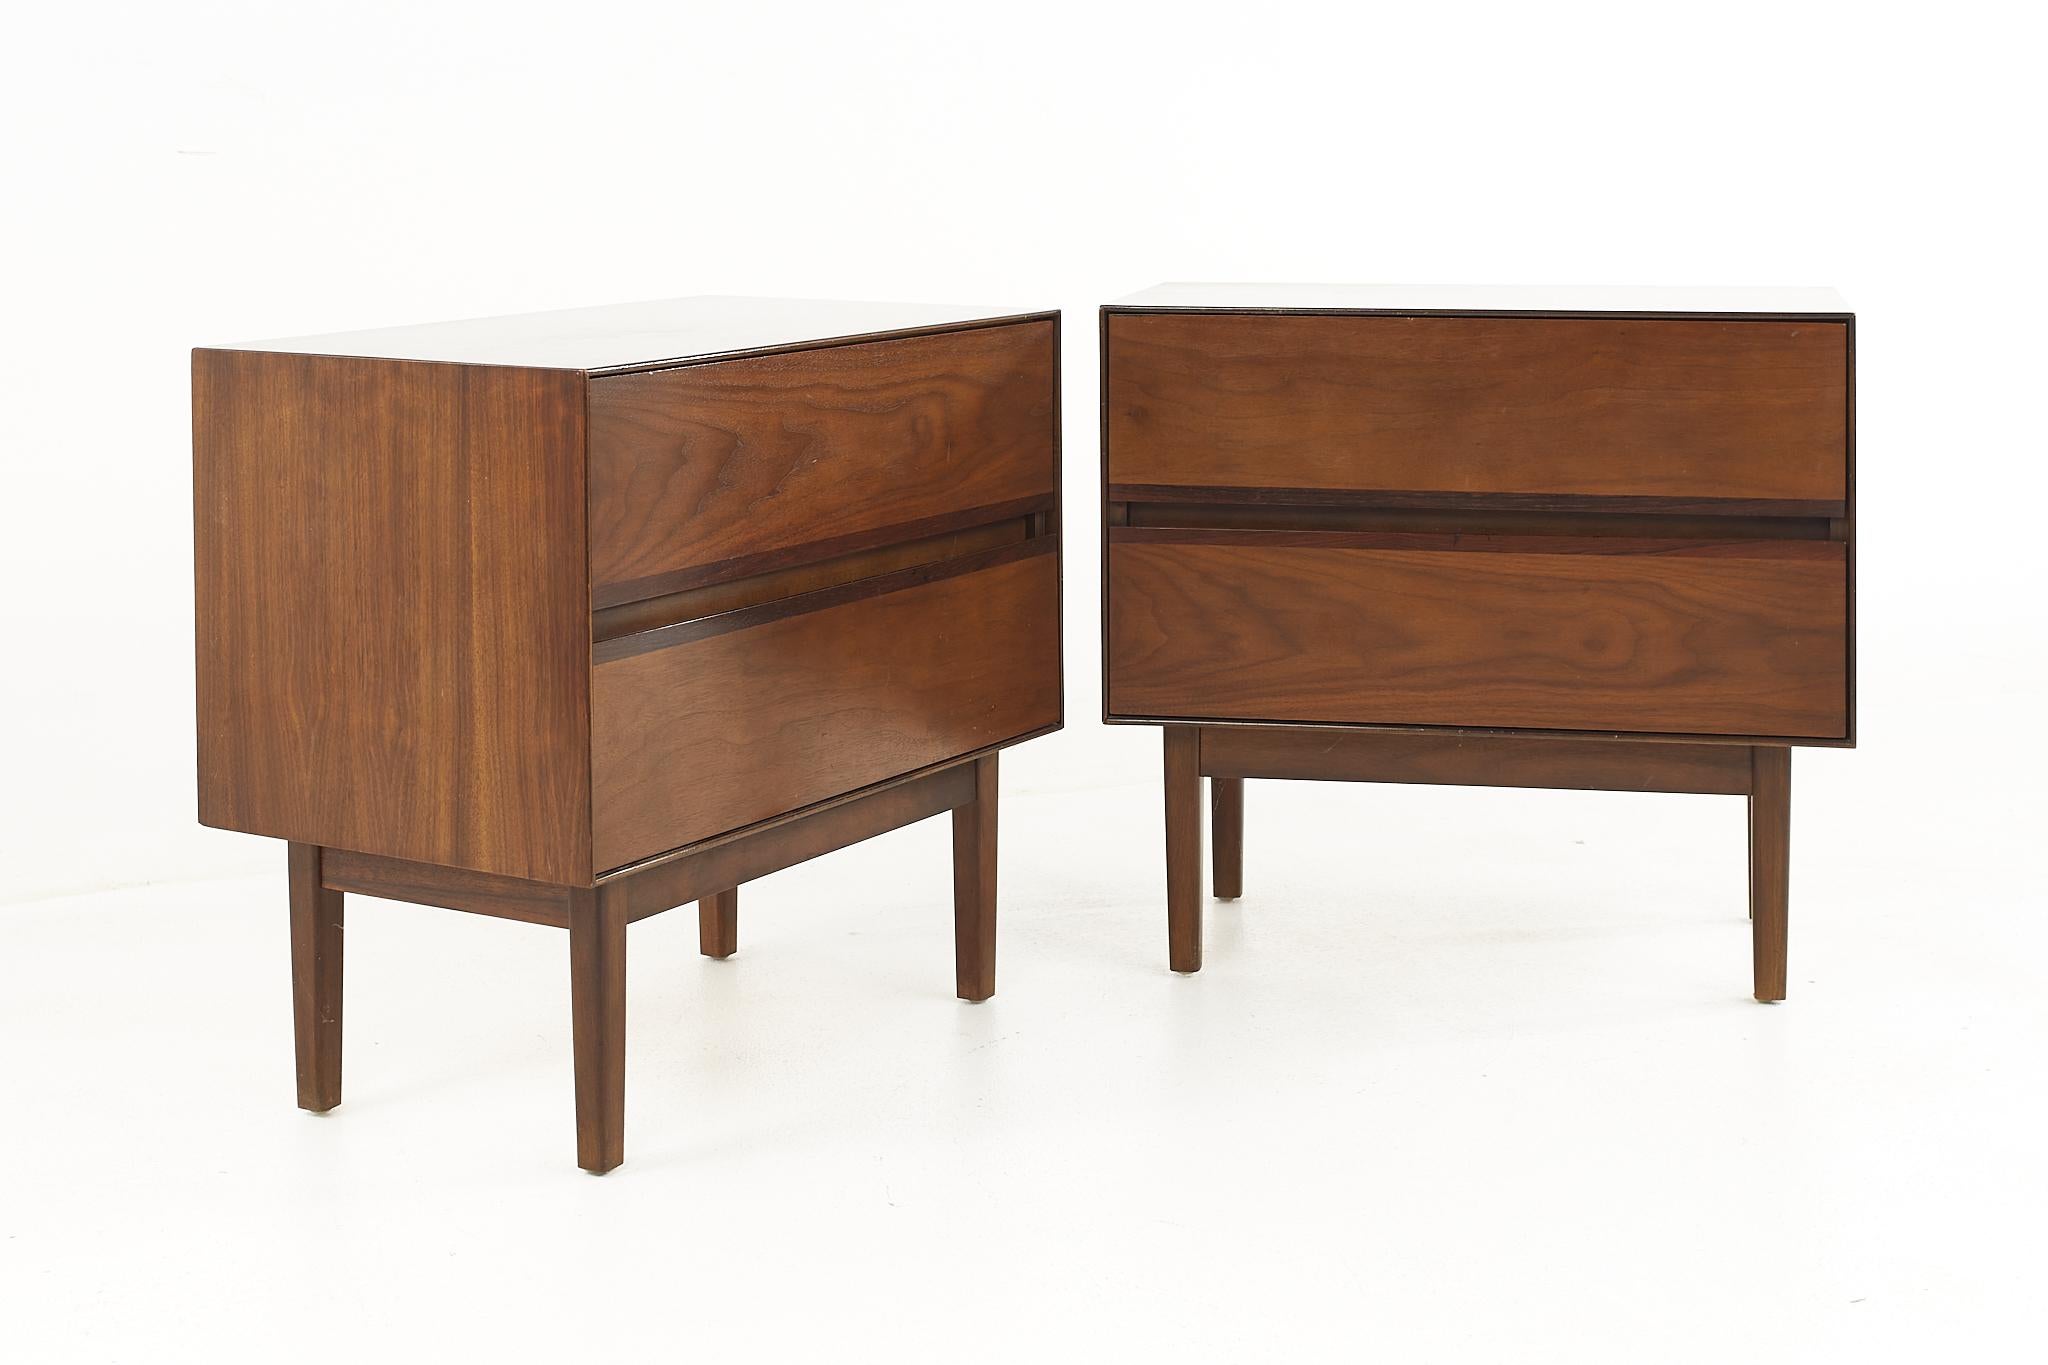 Stanley mid century walnut nightstands, a pair.

Each nightstand measures: 25 wide x 15 deep x 23.25 inches high.

All pieces of furniture can be had in what we call restored vintage condition. That means the piece is restored upon purchase so